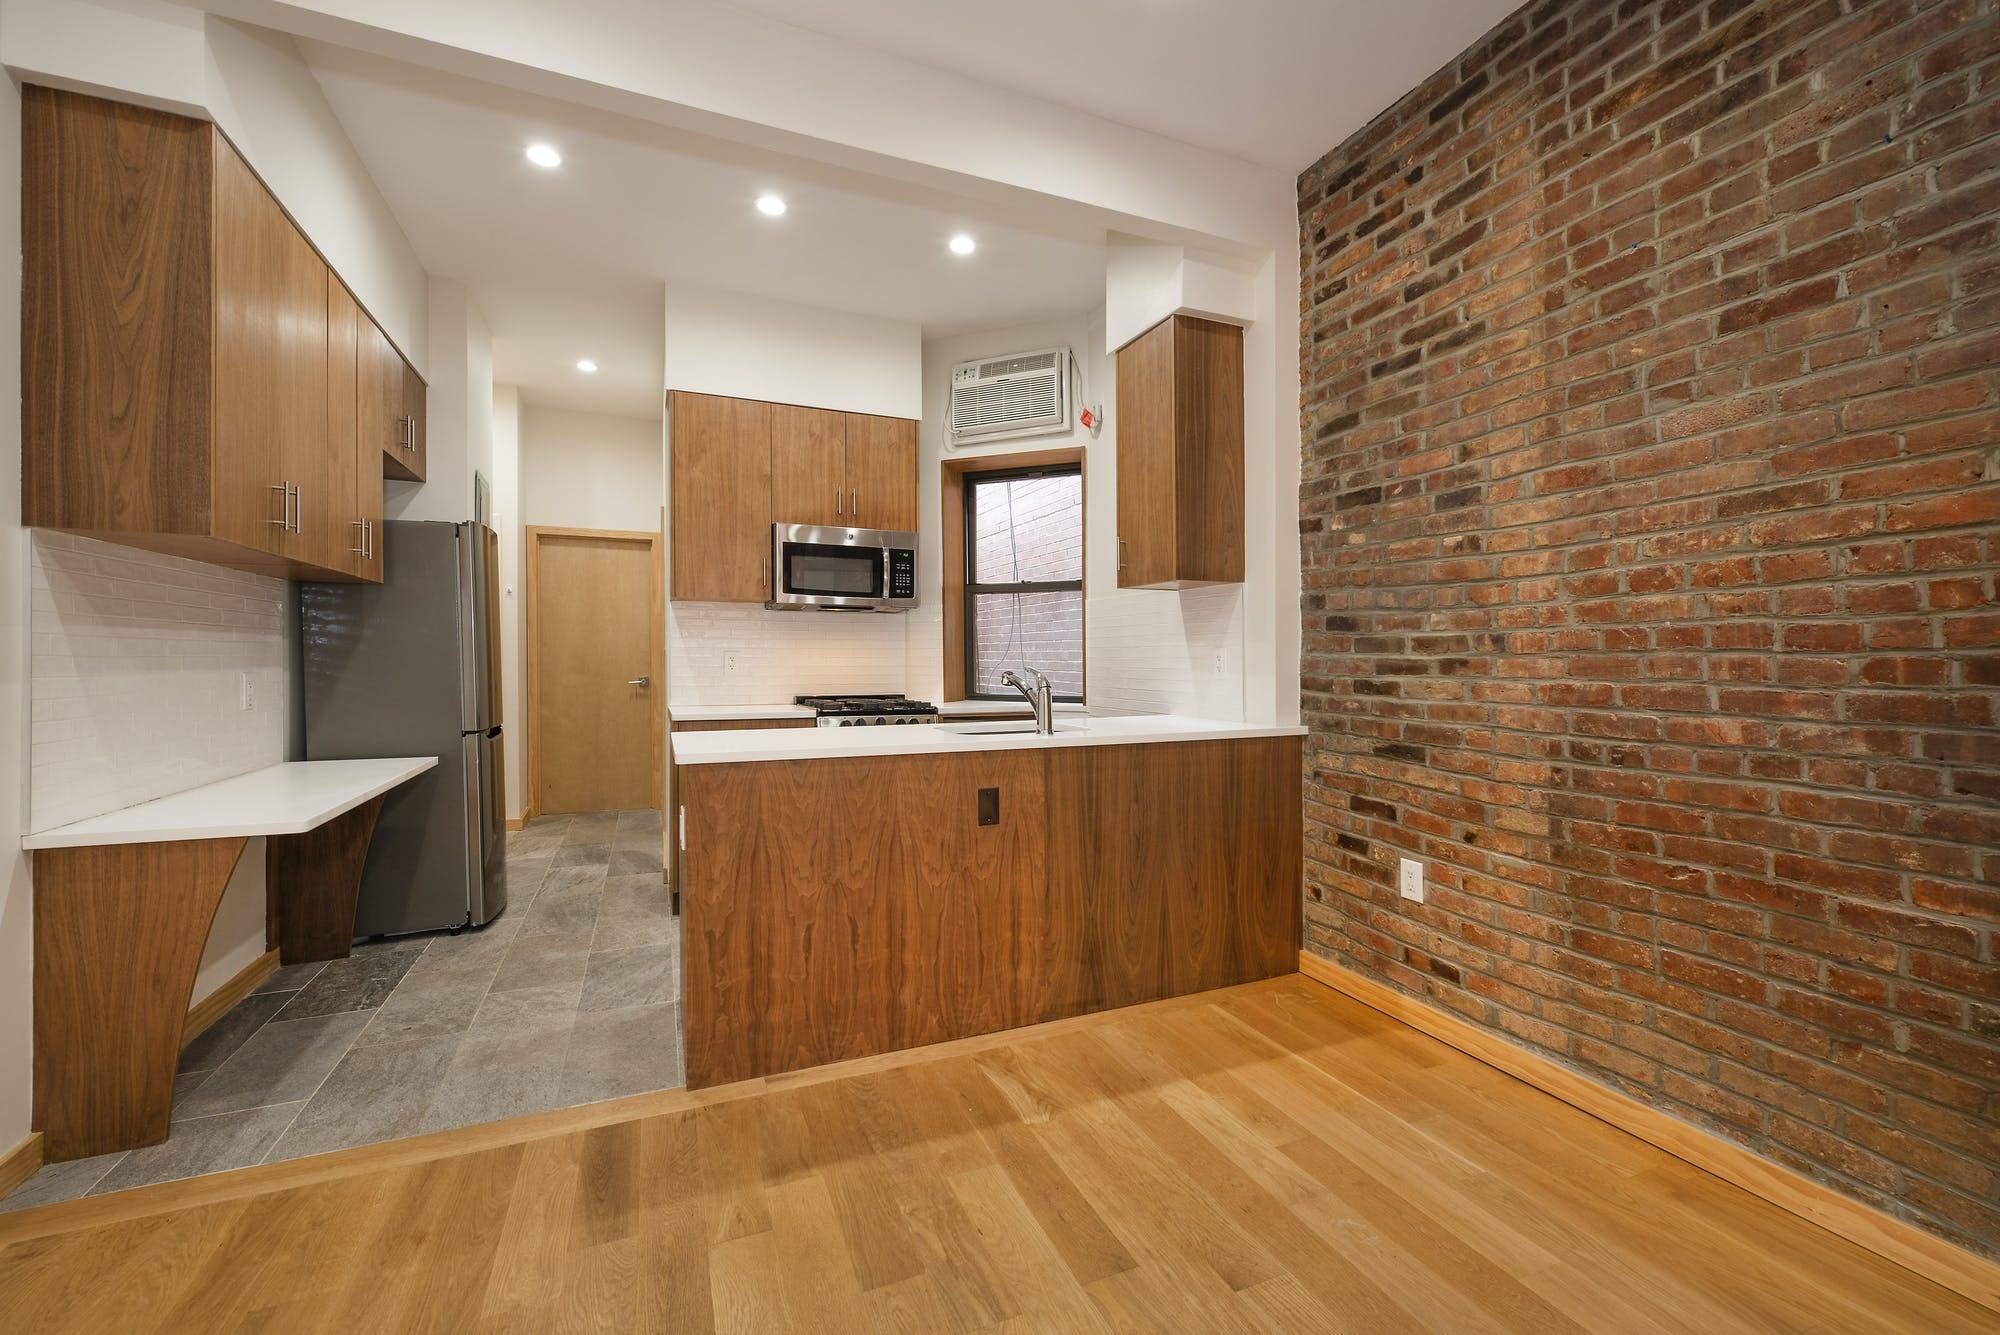 98 Suffolk Street, Apartment 4E between Rivington and Delancey Street NEWLY RENOVATED 2 BEDROOM APARTMENT a PRIVATE LAYOUT a LAUNDRY IN BUILDING PRIME LES LOCATION !